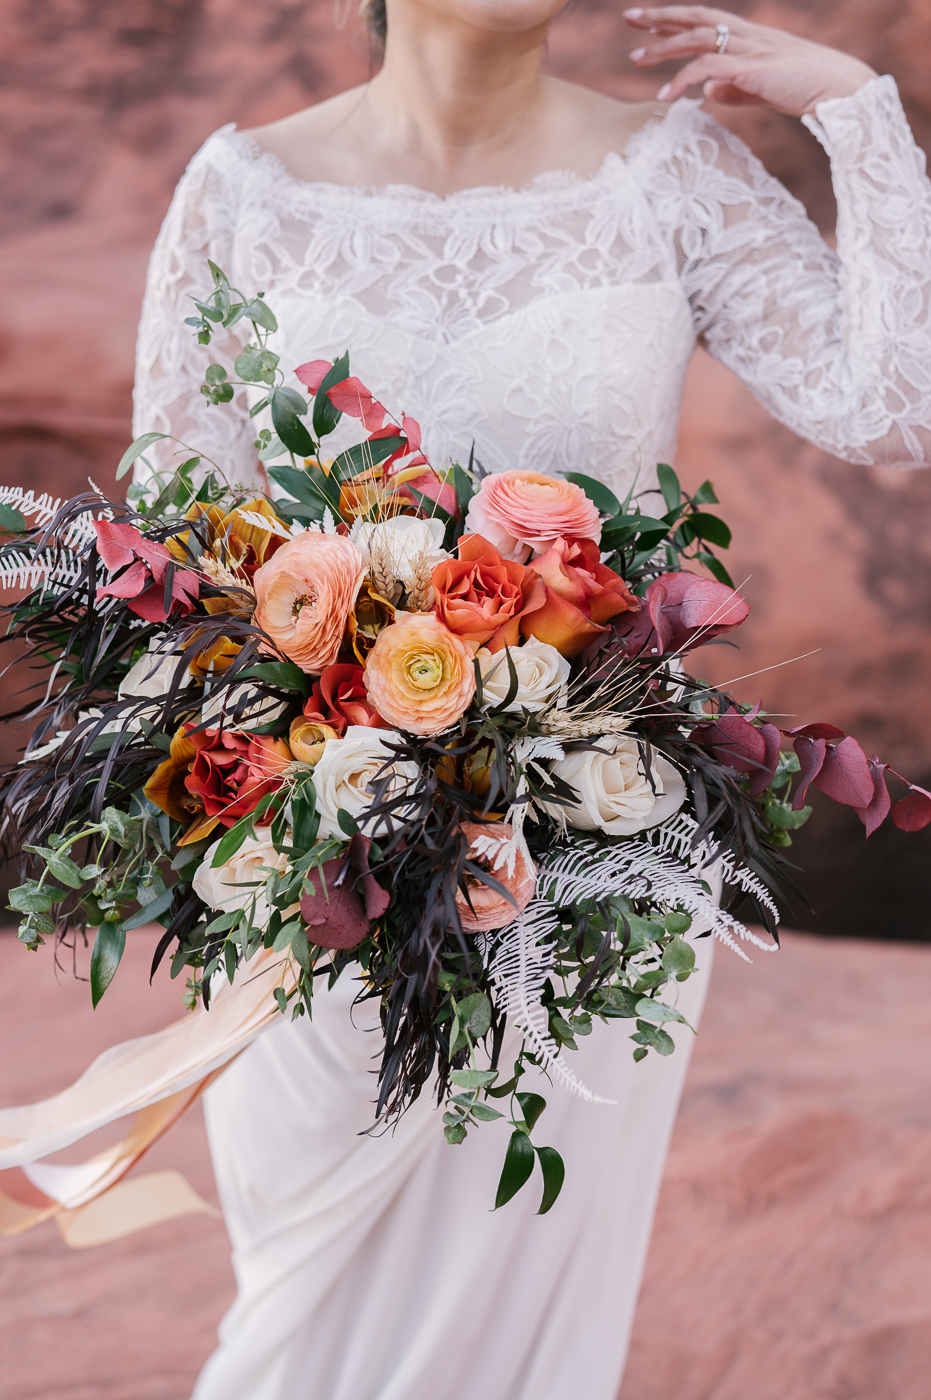 Wedding Bouquet of roses, greenery and some dried flowers in beautiful colors such as a deep purple, cream, burnt orange